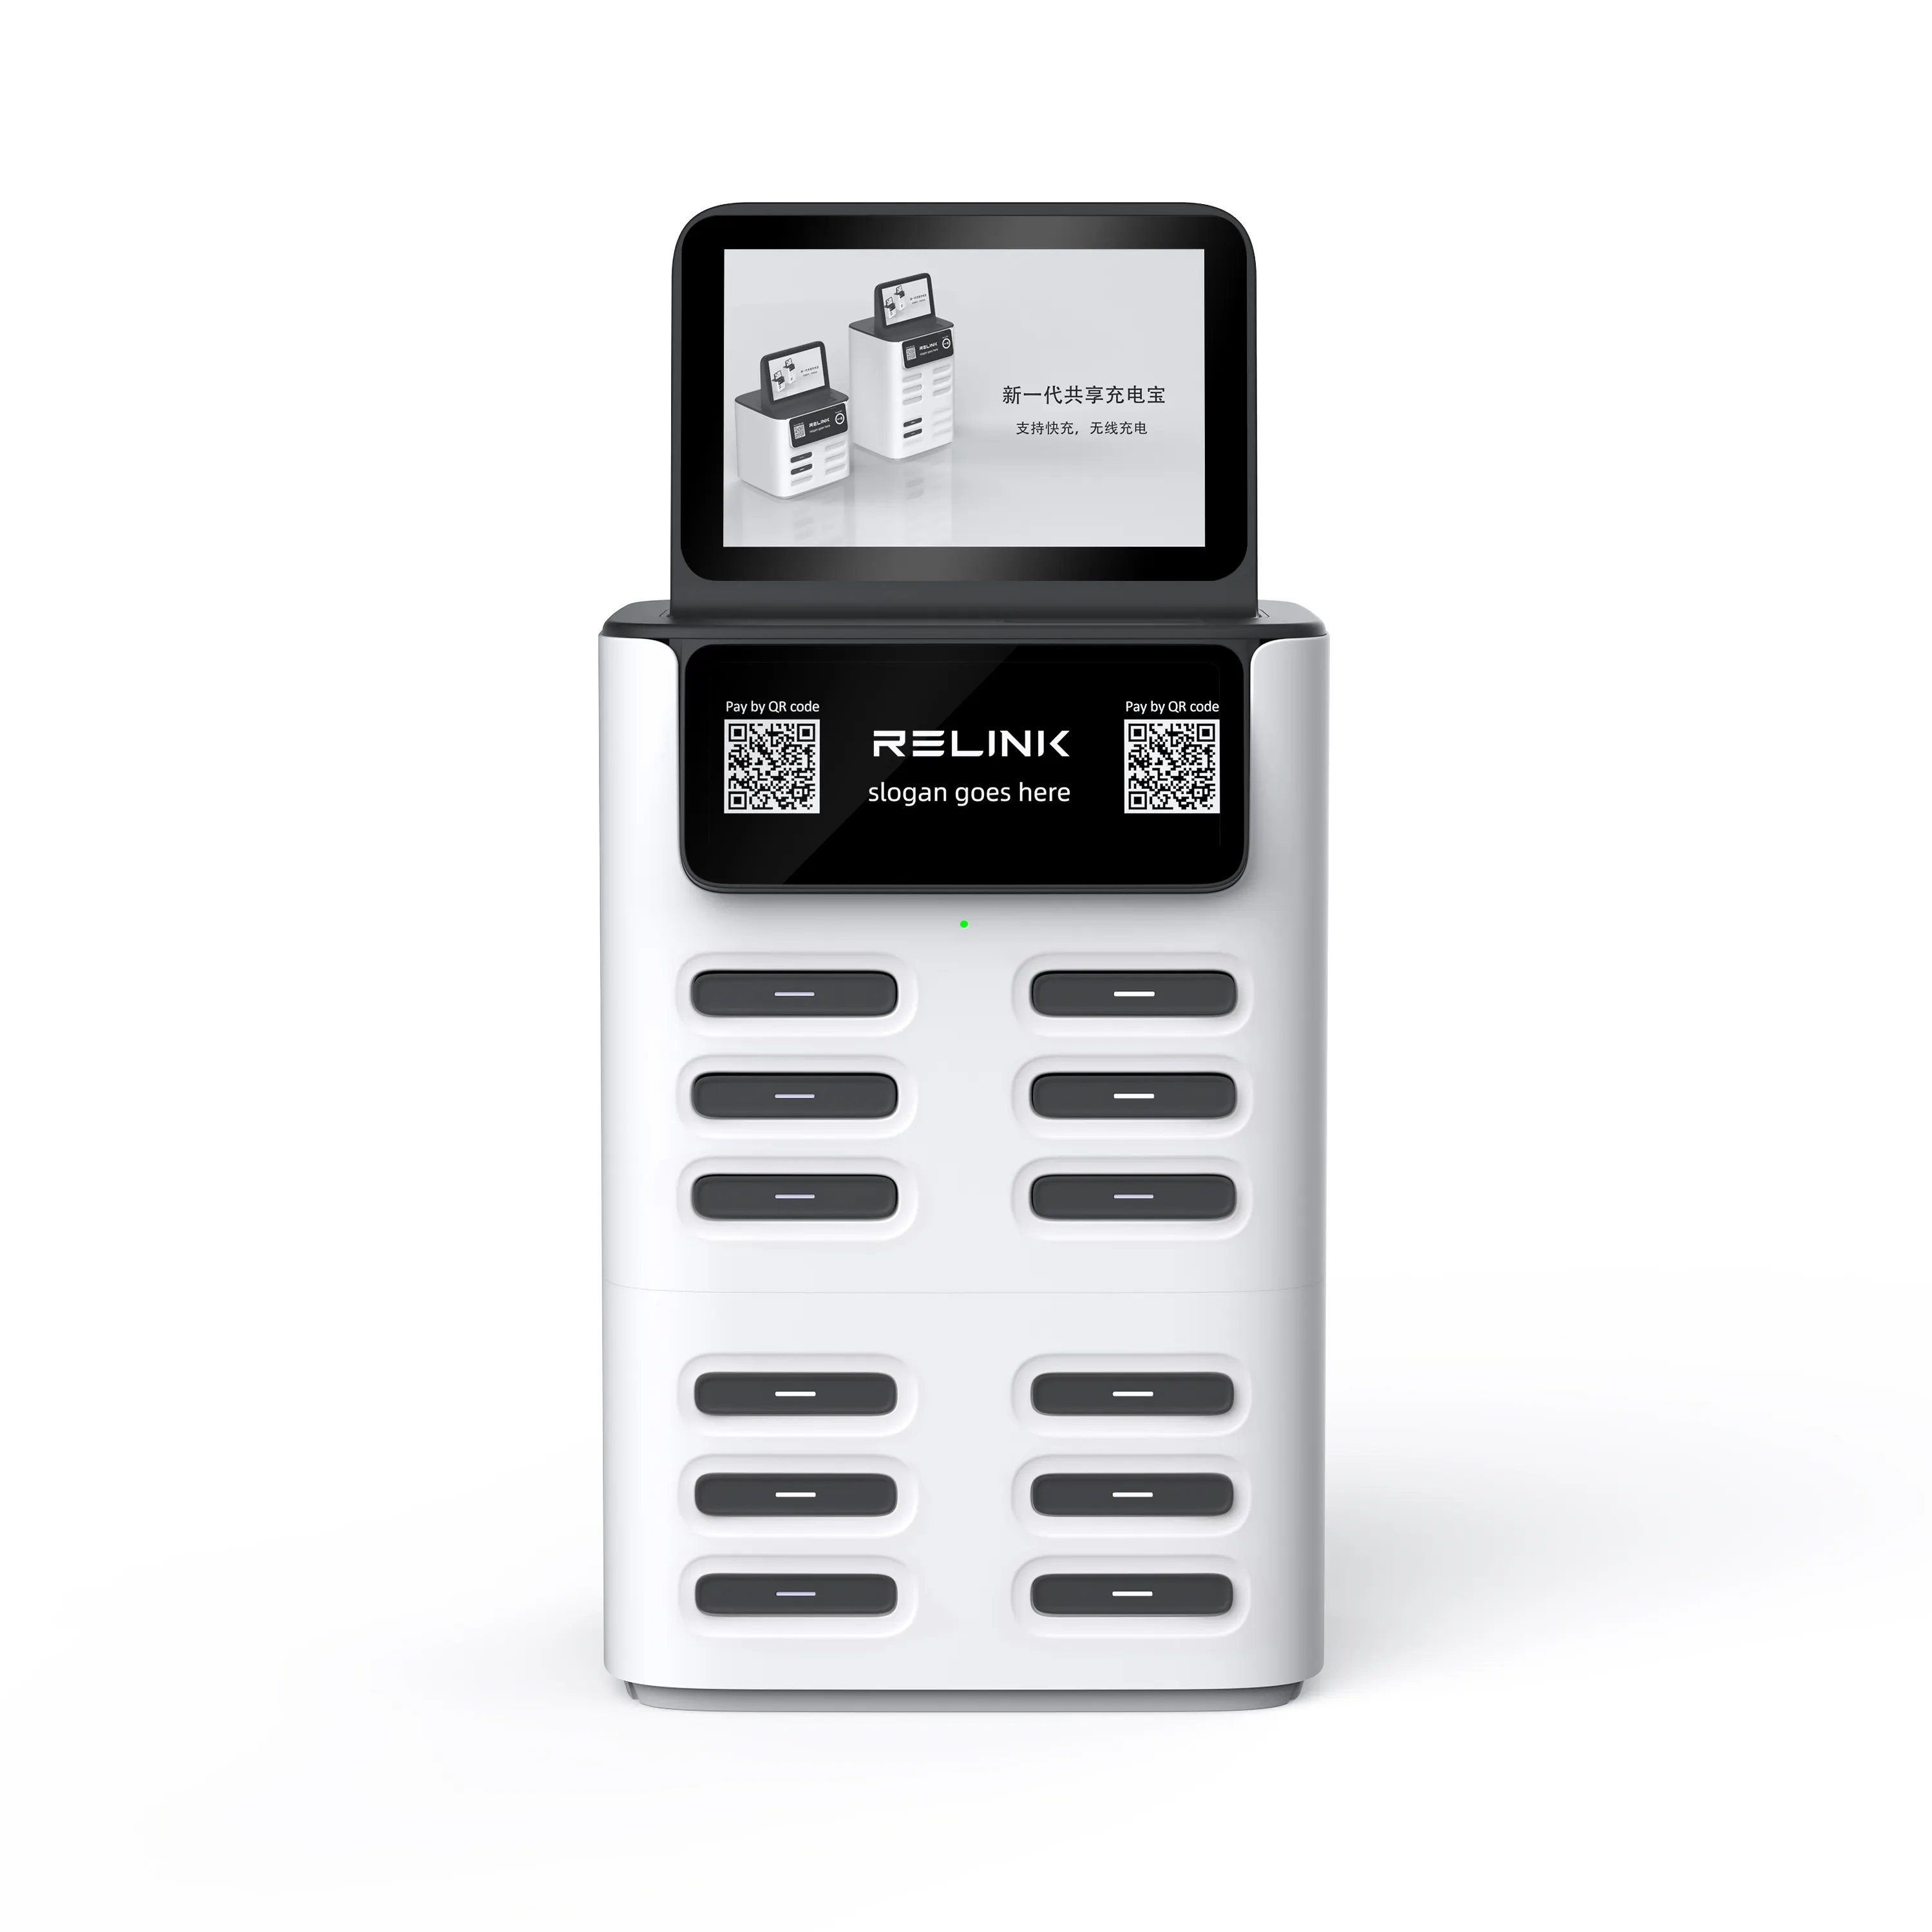 Relink CS-S06 Pro Rental Mobile Phone Power Bank Battery Charger Sharing Portable PowerBank Station